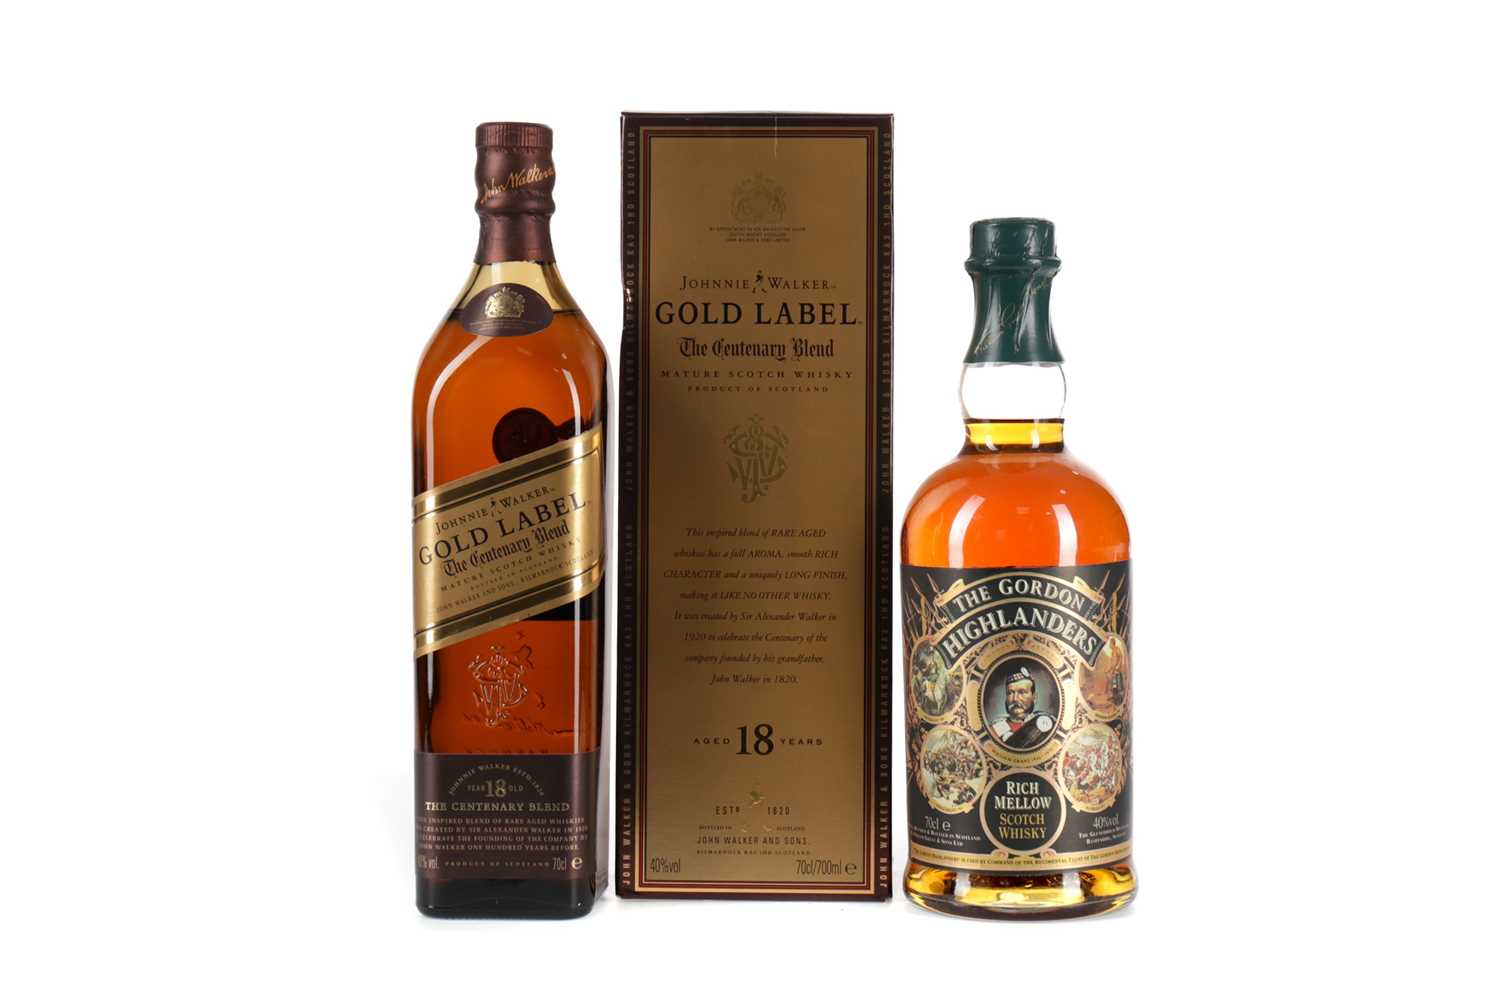 Lot 73 - JOHNNIE WALKER GOLD LABEL CENTENARY BLEND AGED 18 YEARS AND THE GORDON HIGHLANDERS